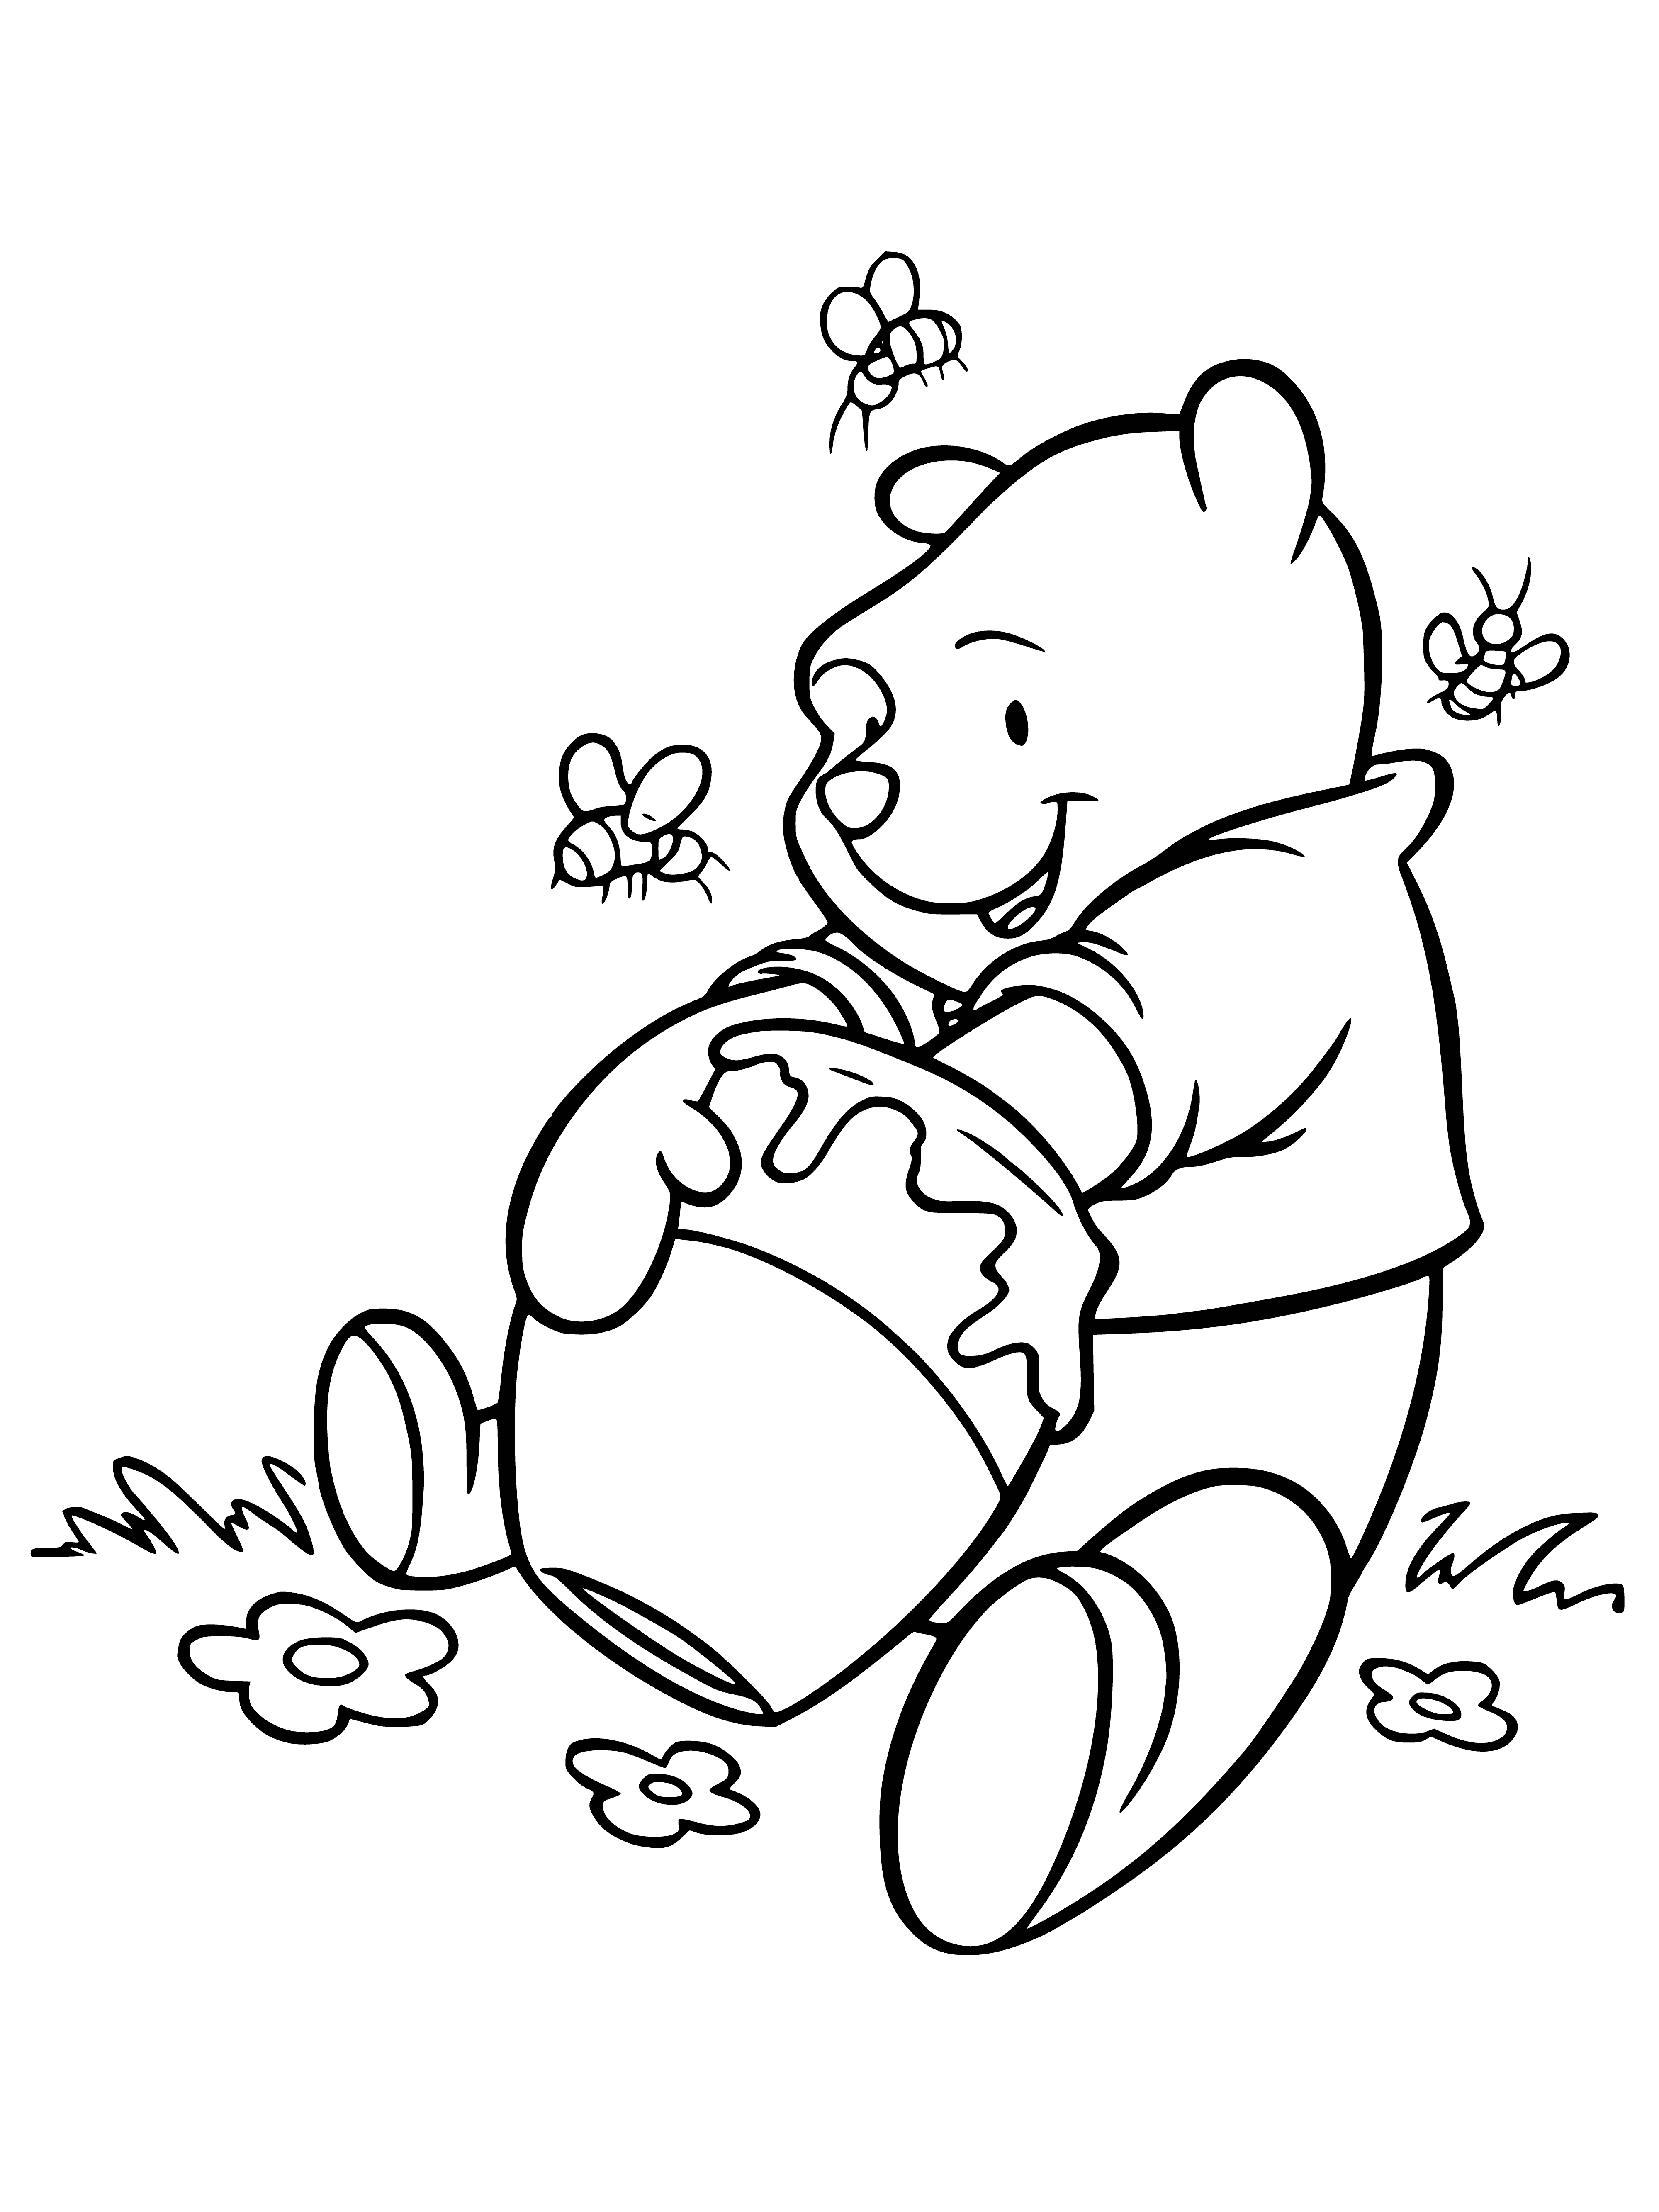 Winnie feasts on honey coloring page